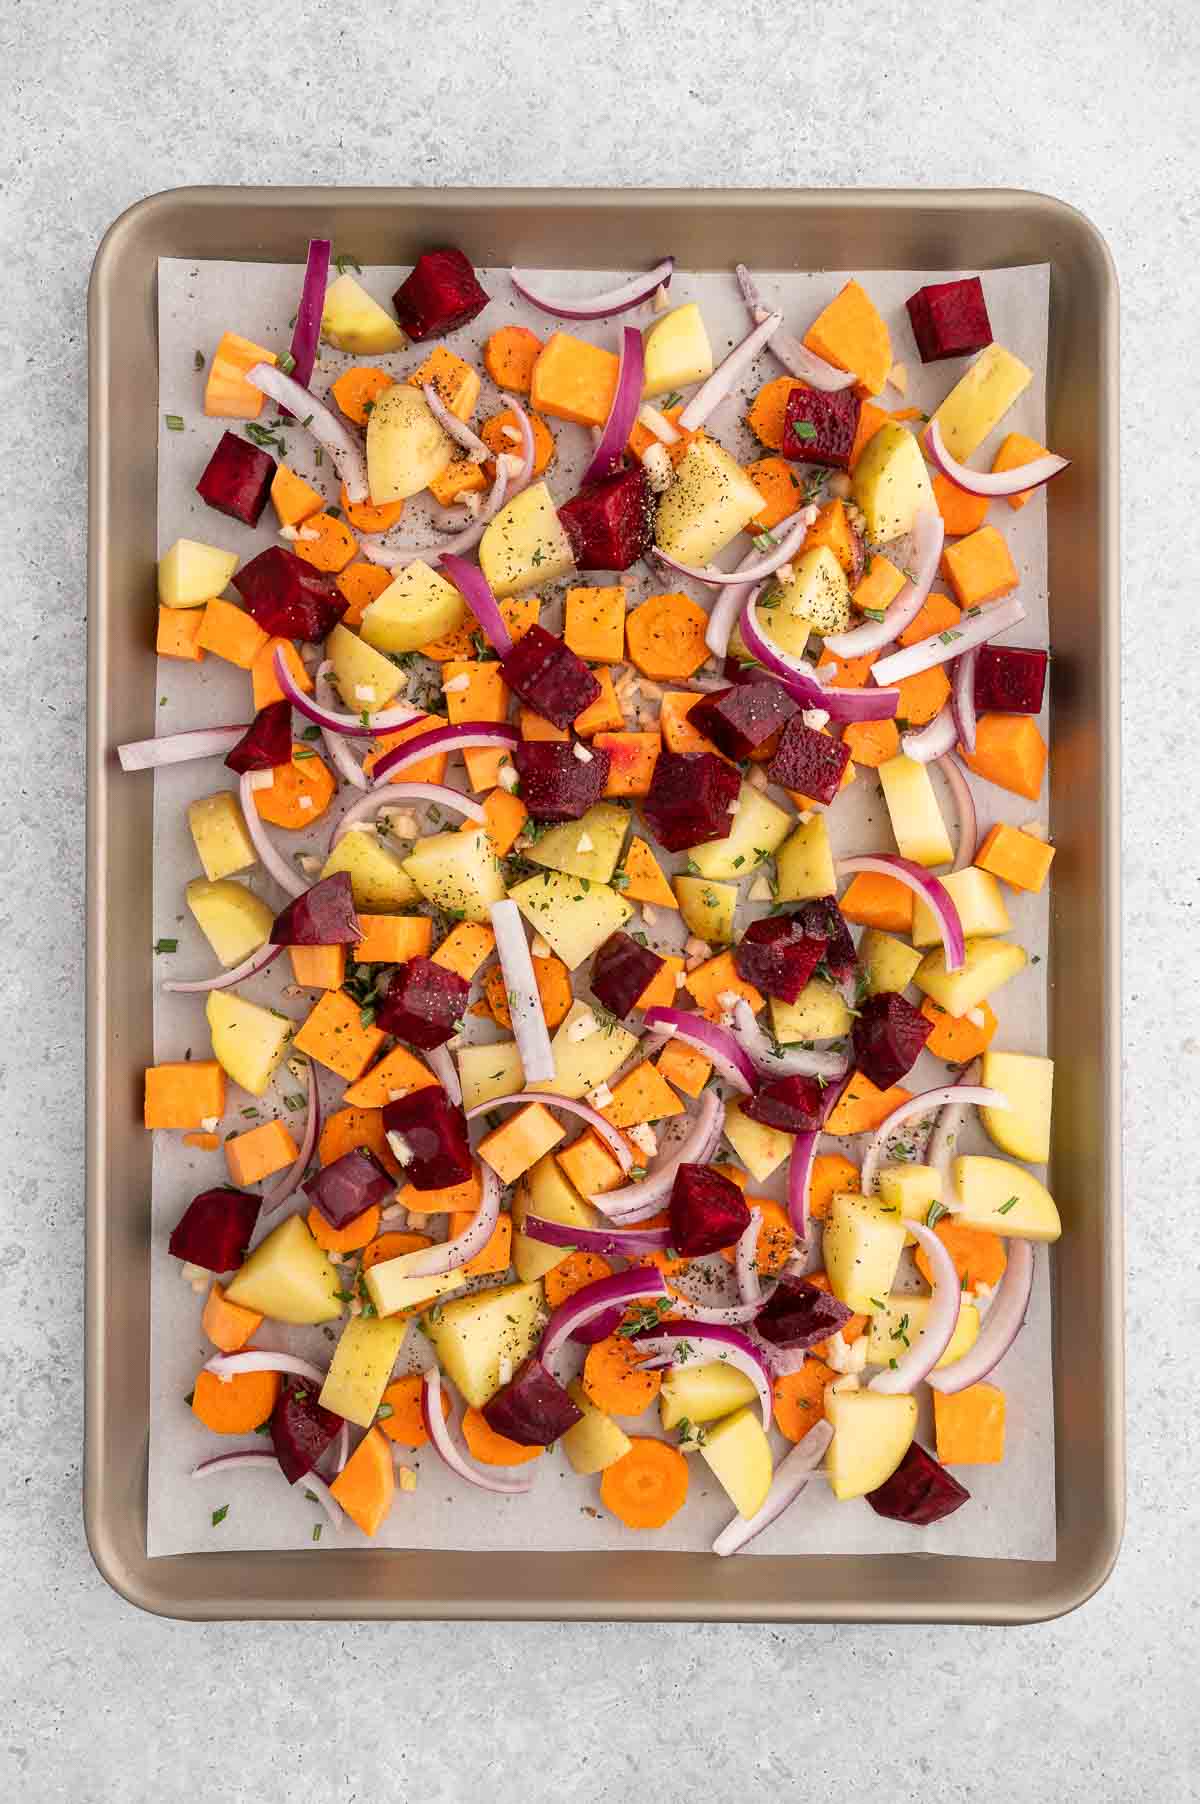 Chopped root vegetables on a baking sheet.